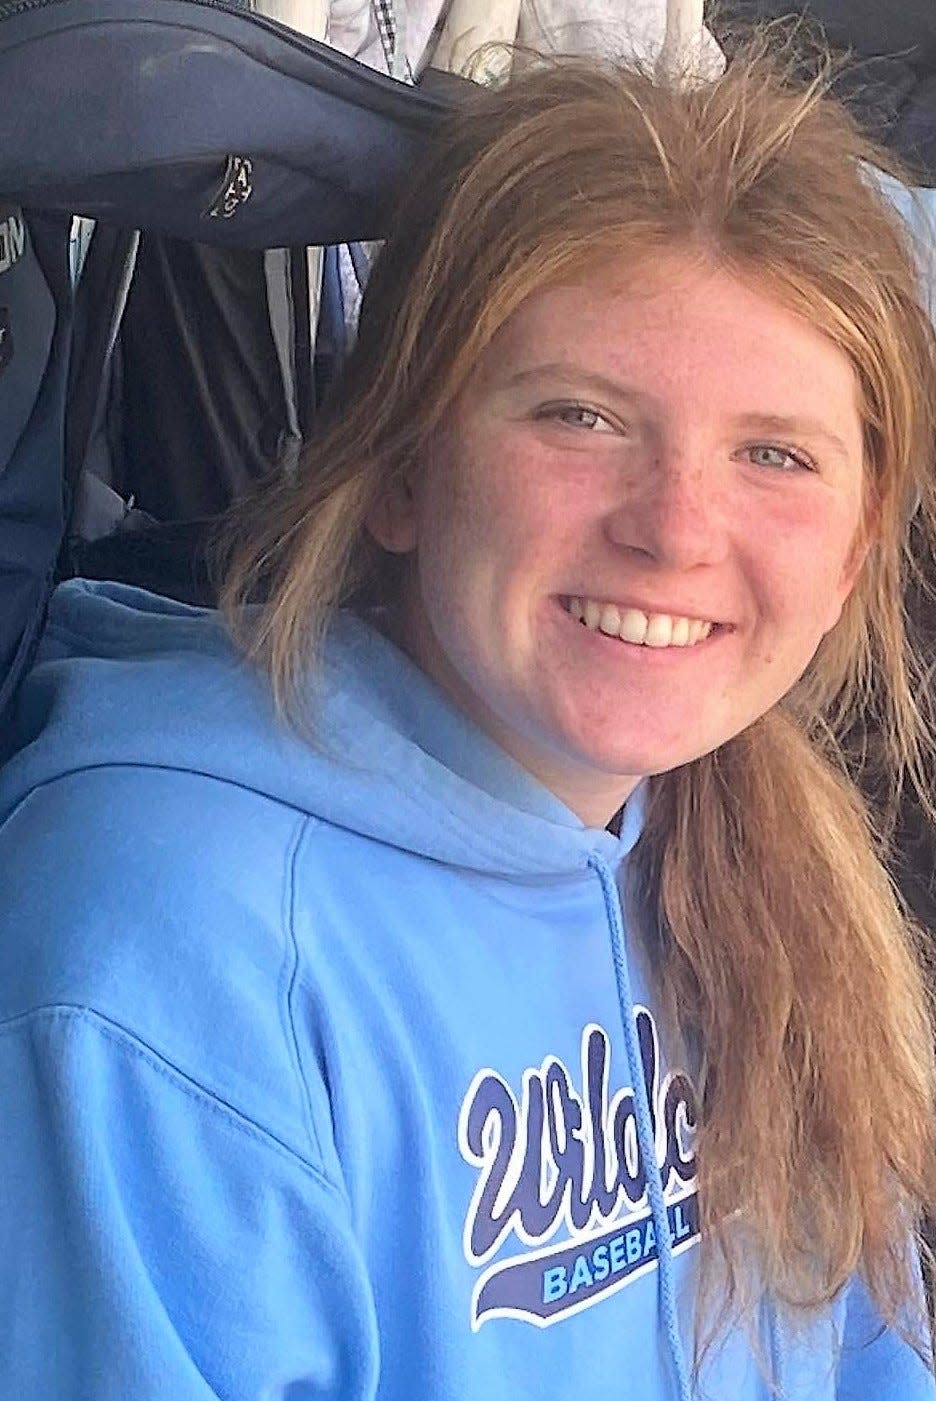 Junior McKayla Kortes threw her fourth no-hitter of the season on Wednesday in York's 18-0 victory over Cape Elizabeth in a Class B South softball game.